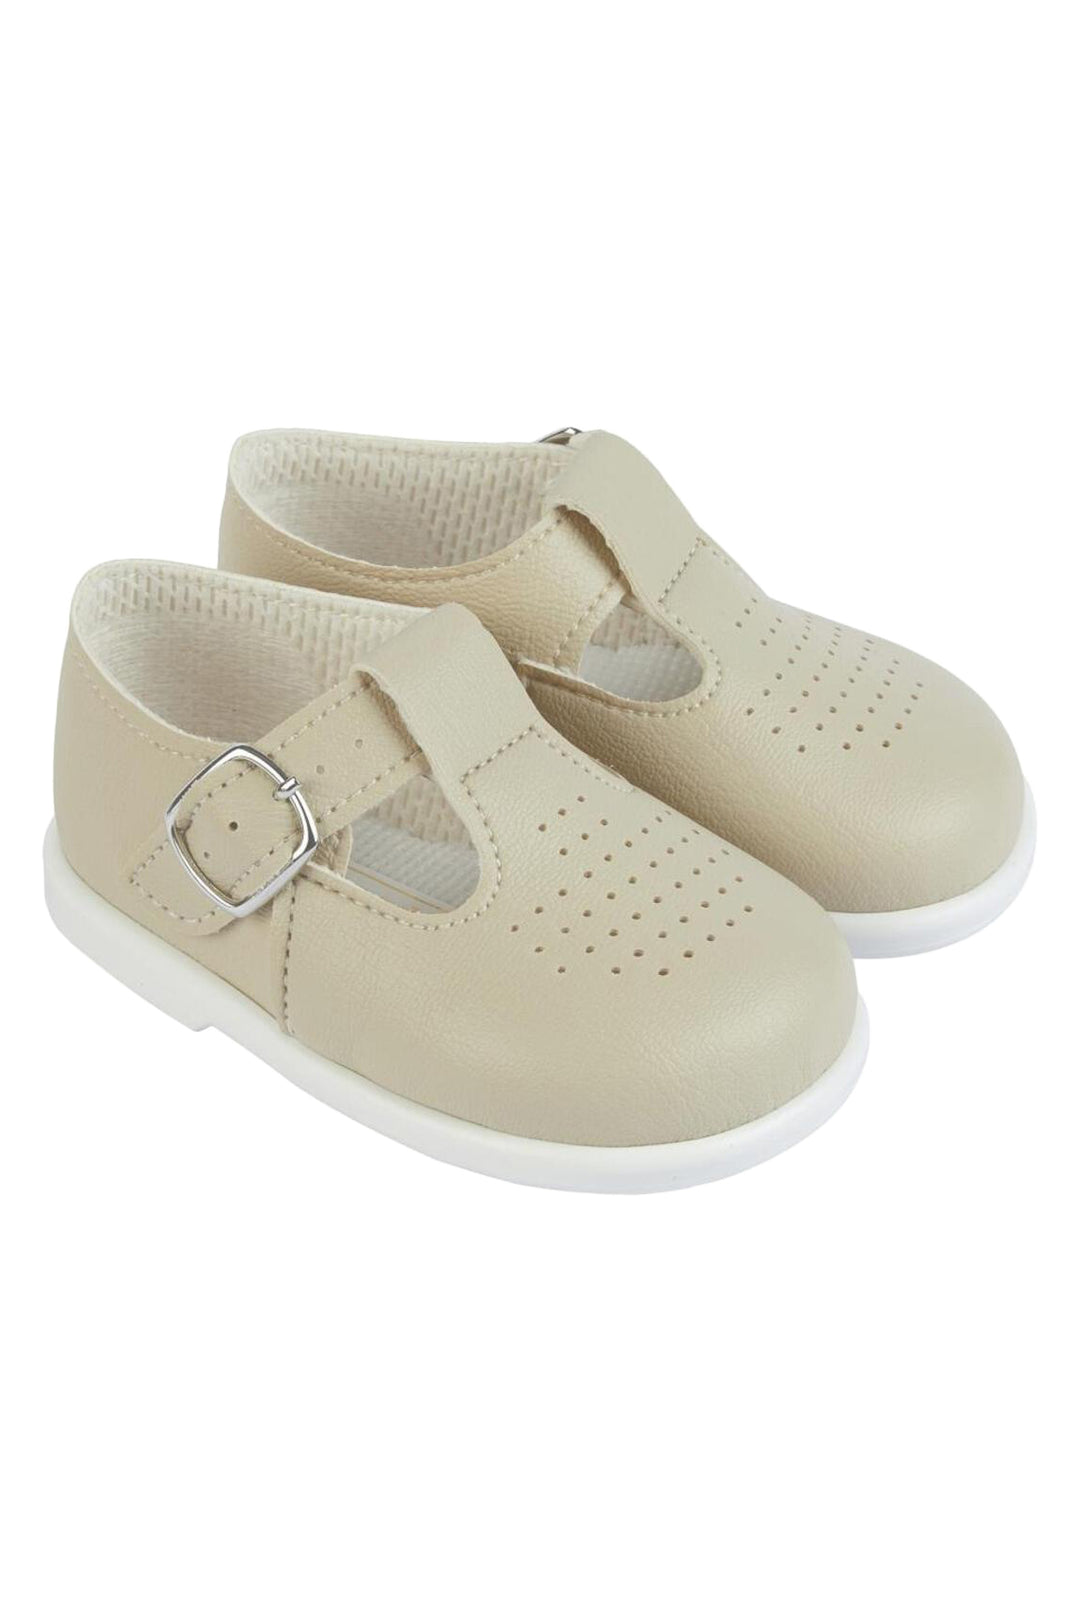 Baypods Biscuit T-Bar Hard Sole Shoes | Millie and John